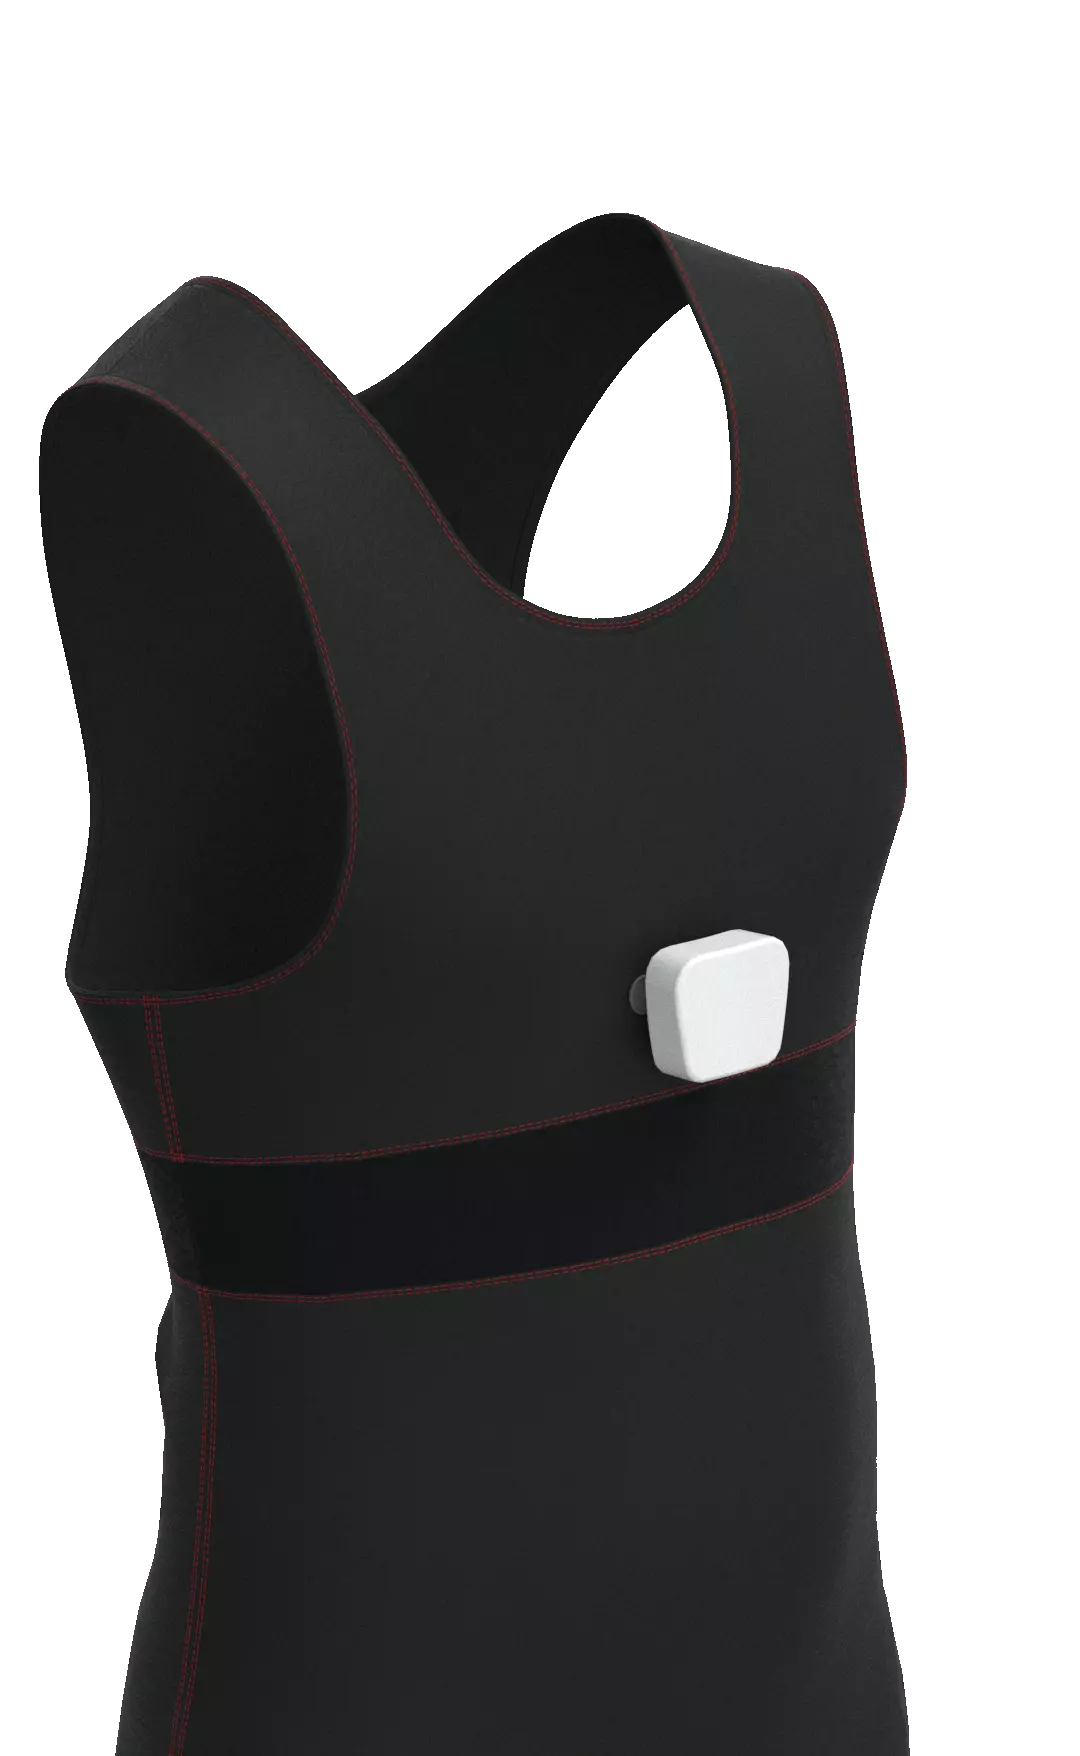 smart clothing wearable